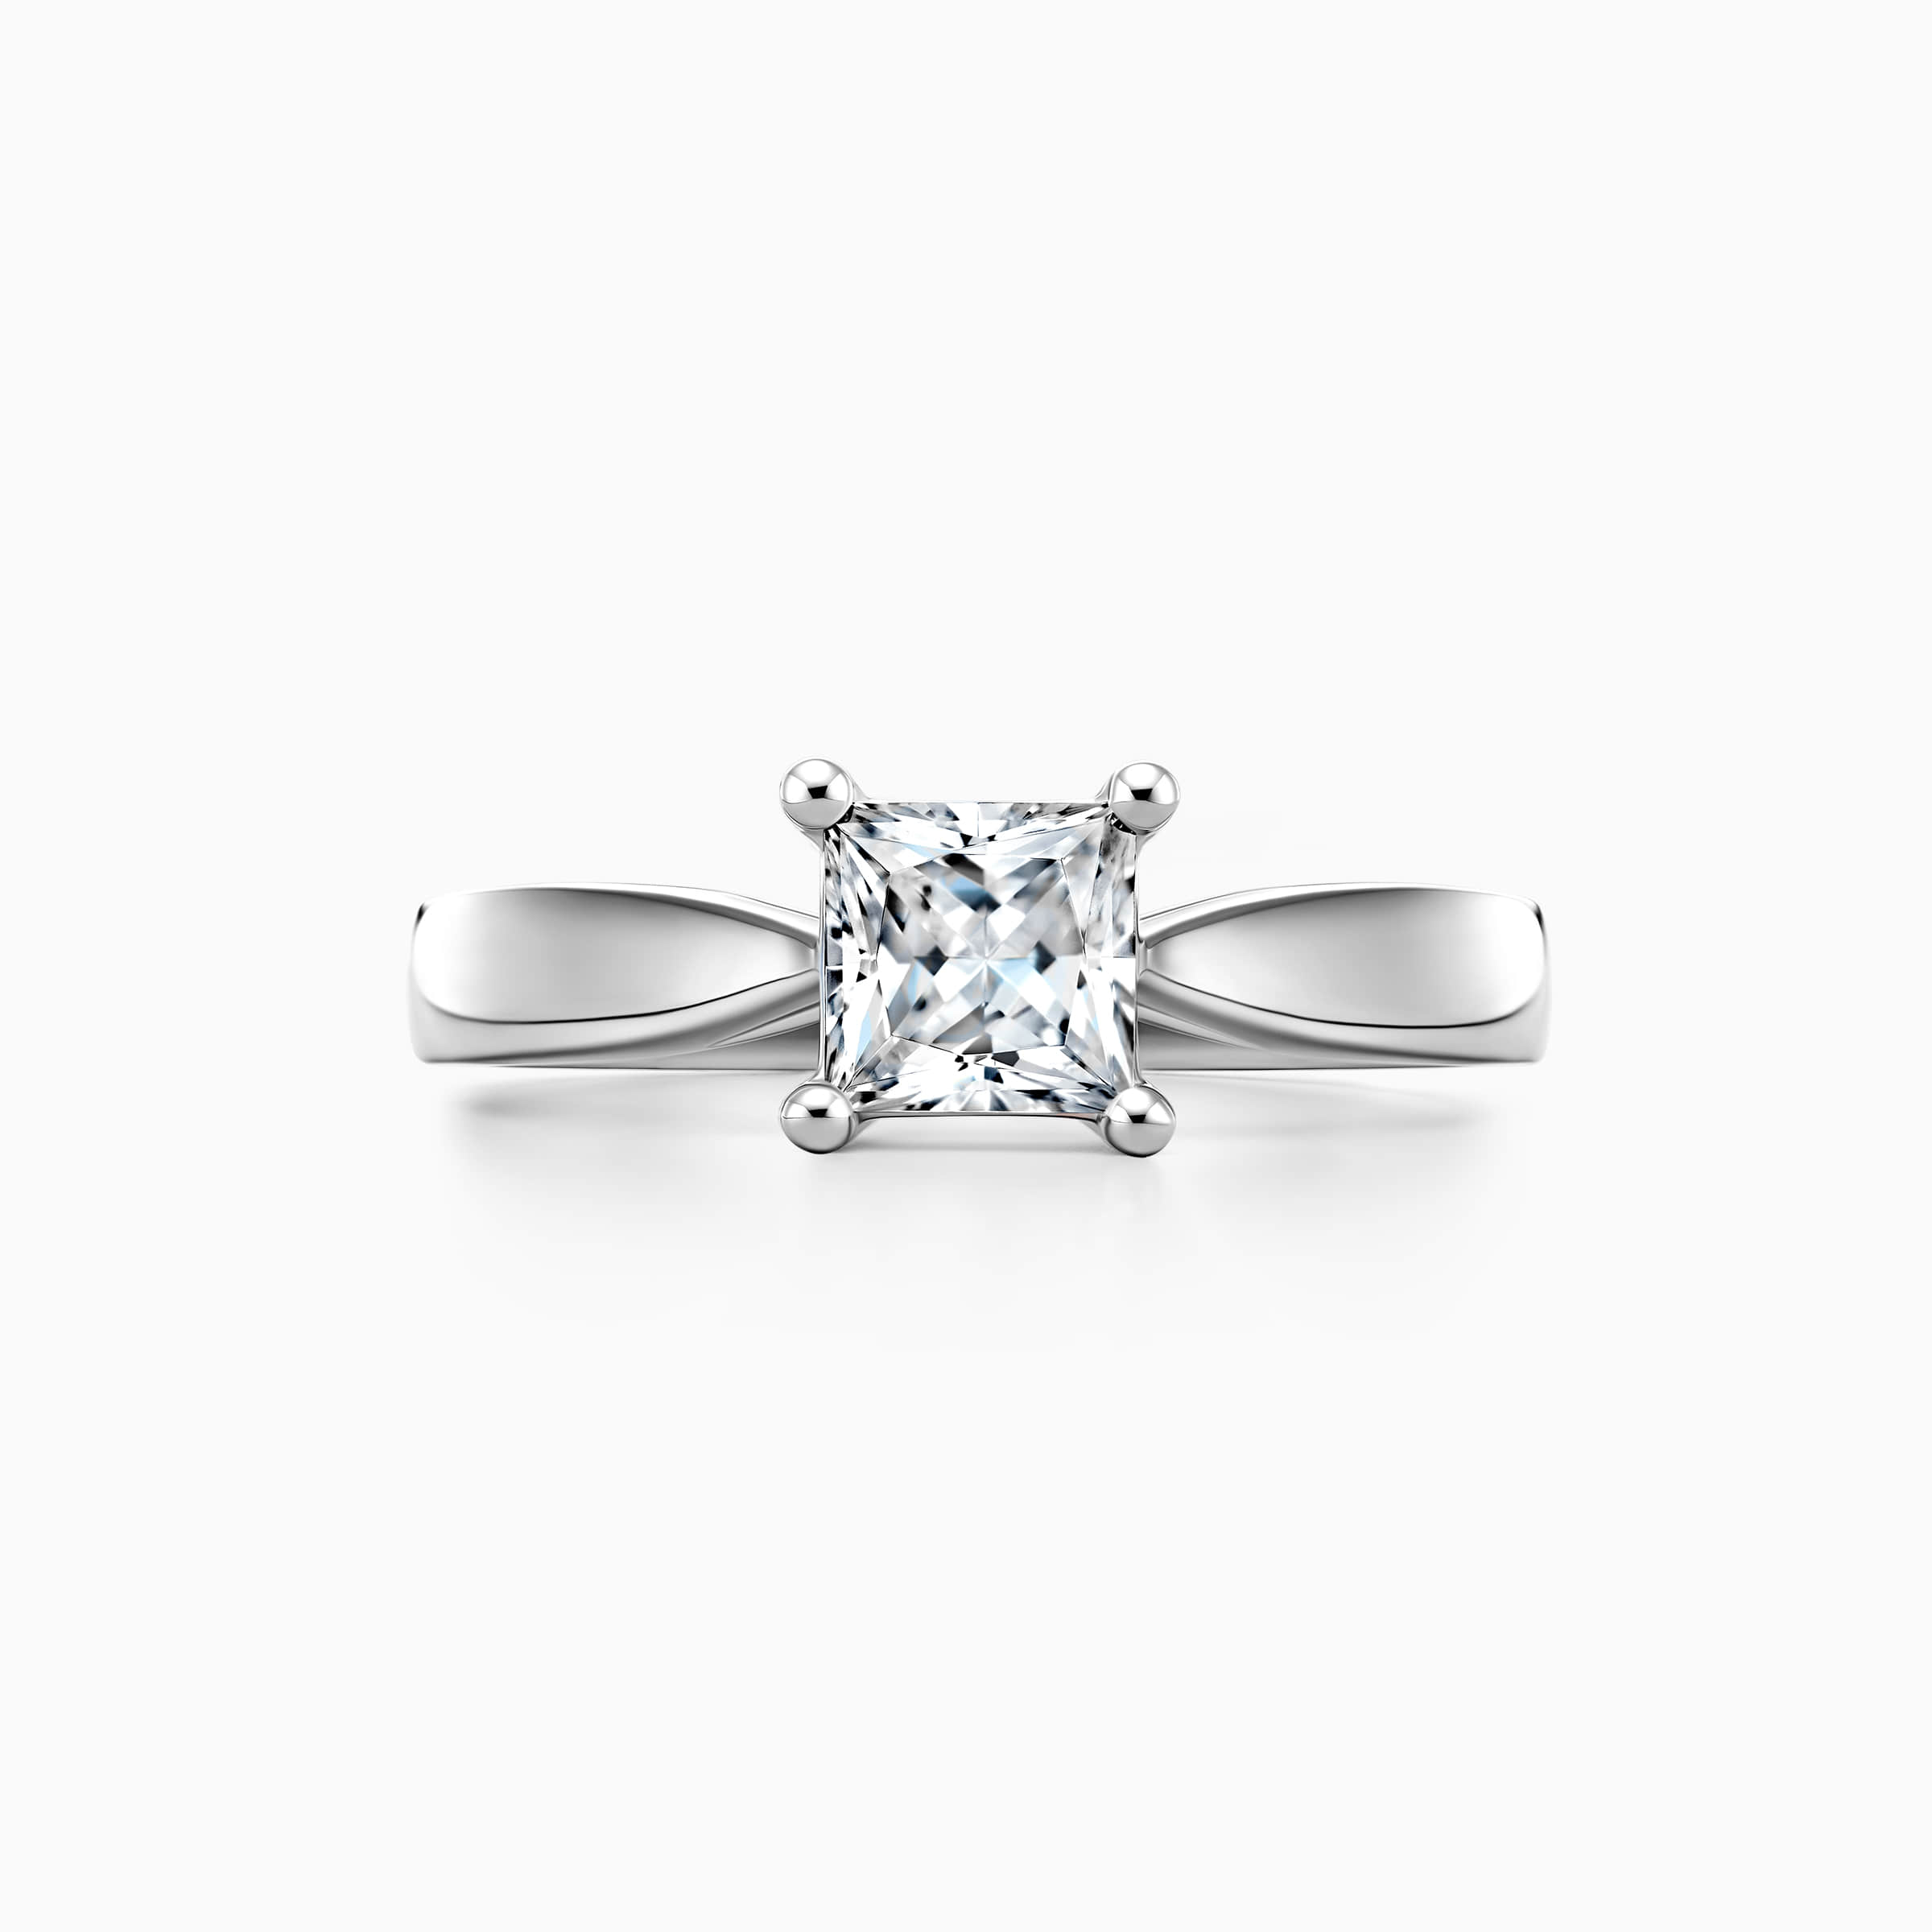 darry ring princess cut diamond engagement ring front view